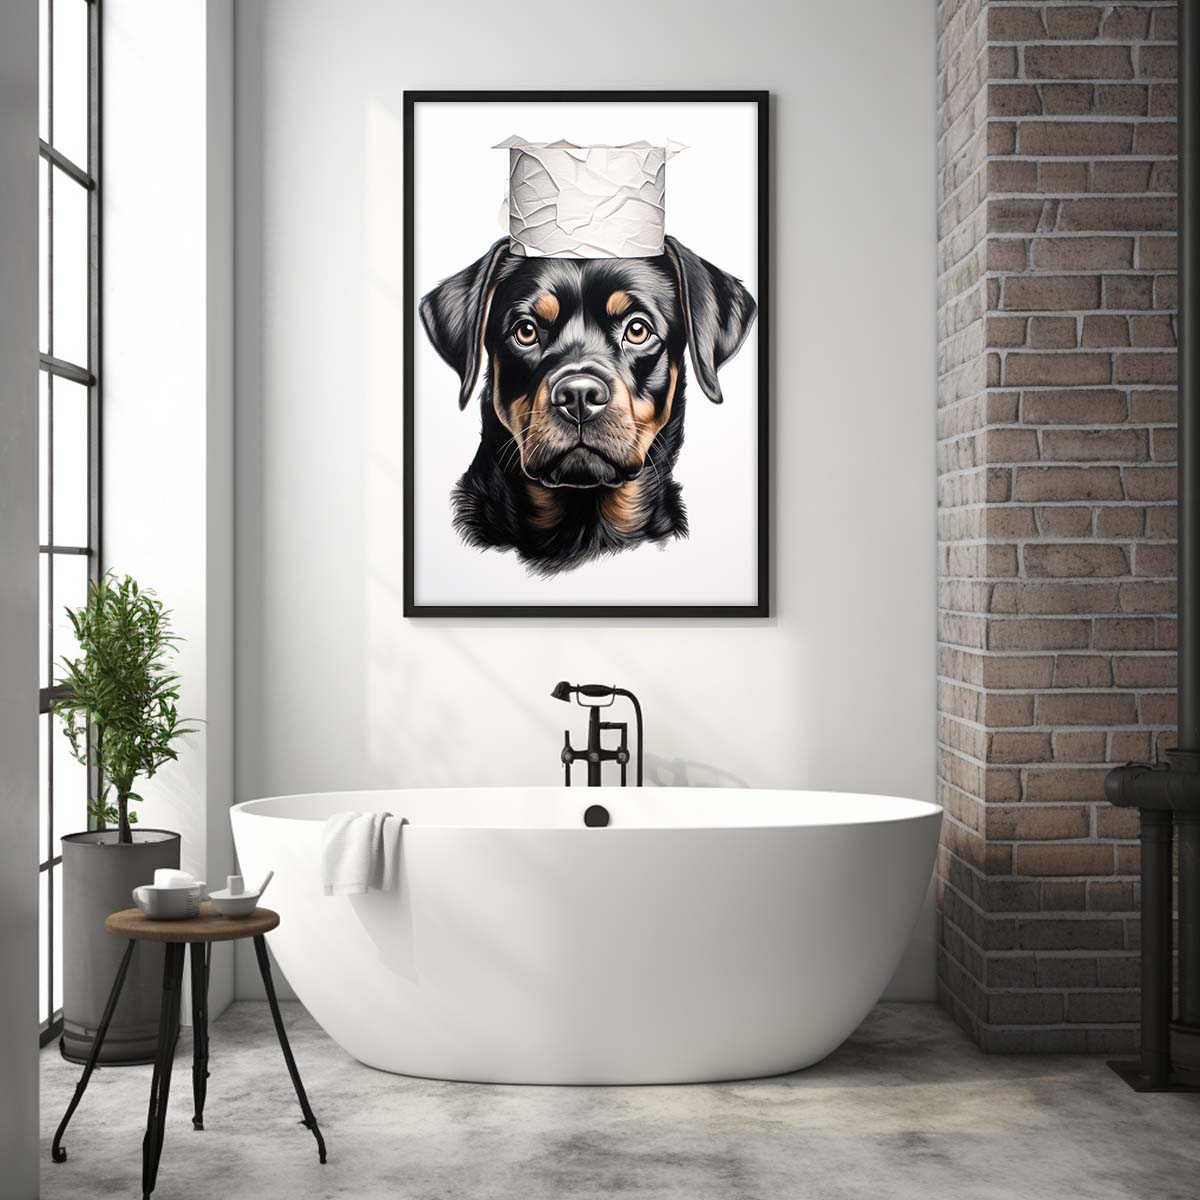 Rottweiler With Toilet Paper Canvas Art, Rottweiler With Toilet Paper, Funny Dog Art, Bathroom Wall Decor, Home Decor, Bathroom Wall Art, Dog Wall Decor, Animal Decor, Pet Gift